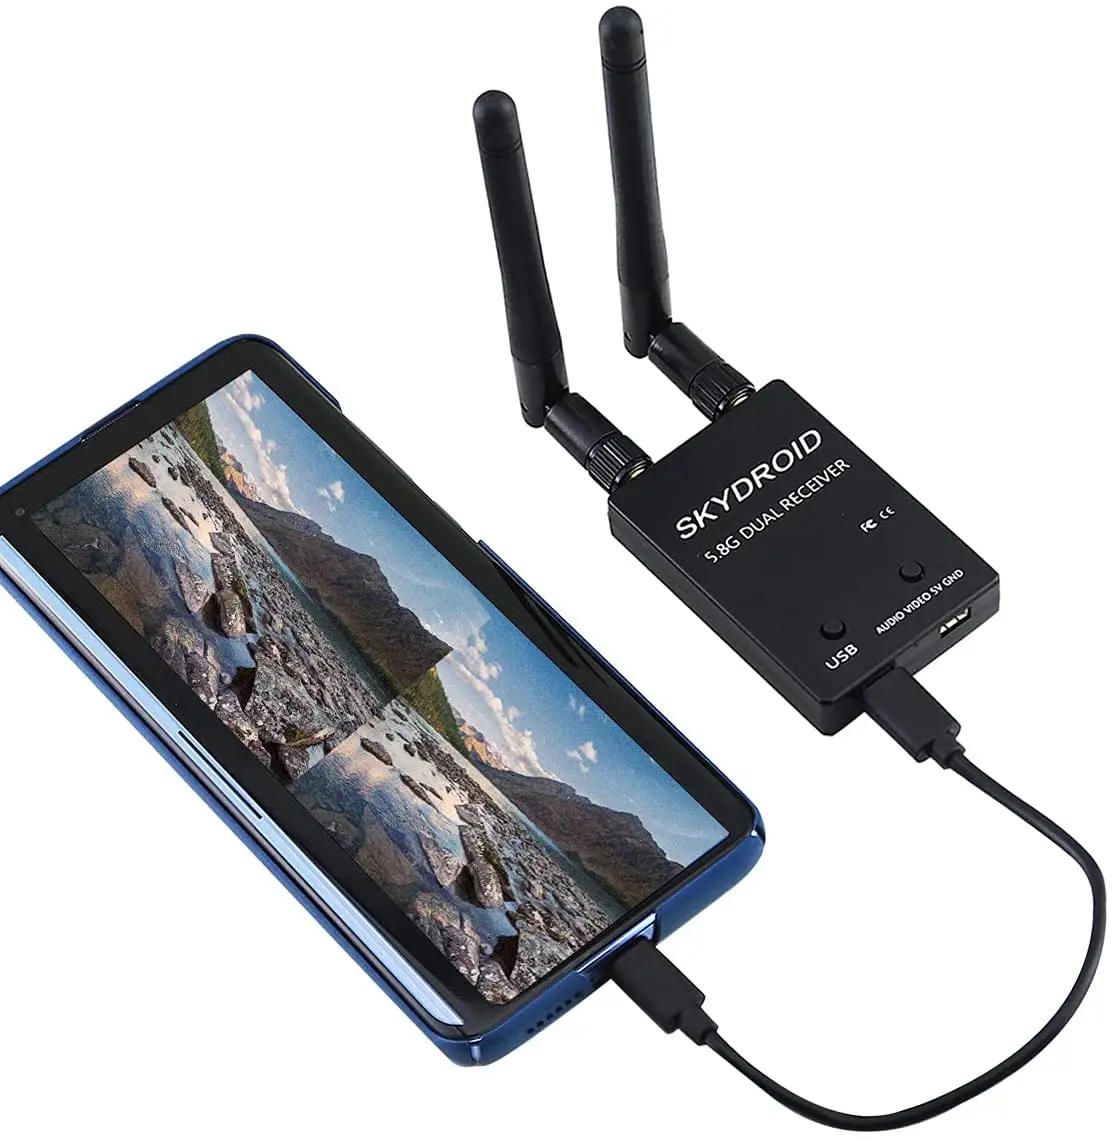 SoloGood Skydroid FPV Receiver 5.8G Dual OTG 150CH Video Downlink Receiver Double Antenna for Android Phone PC Monitor(Black)